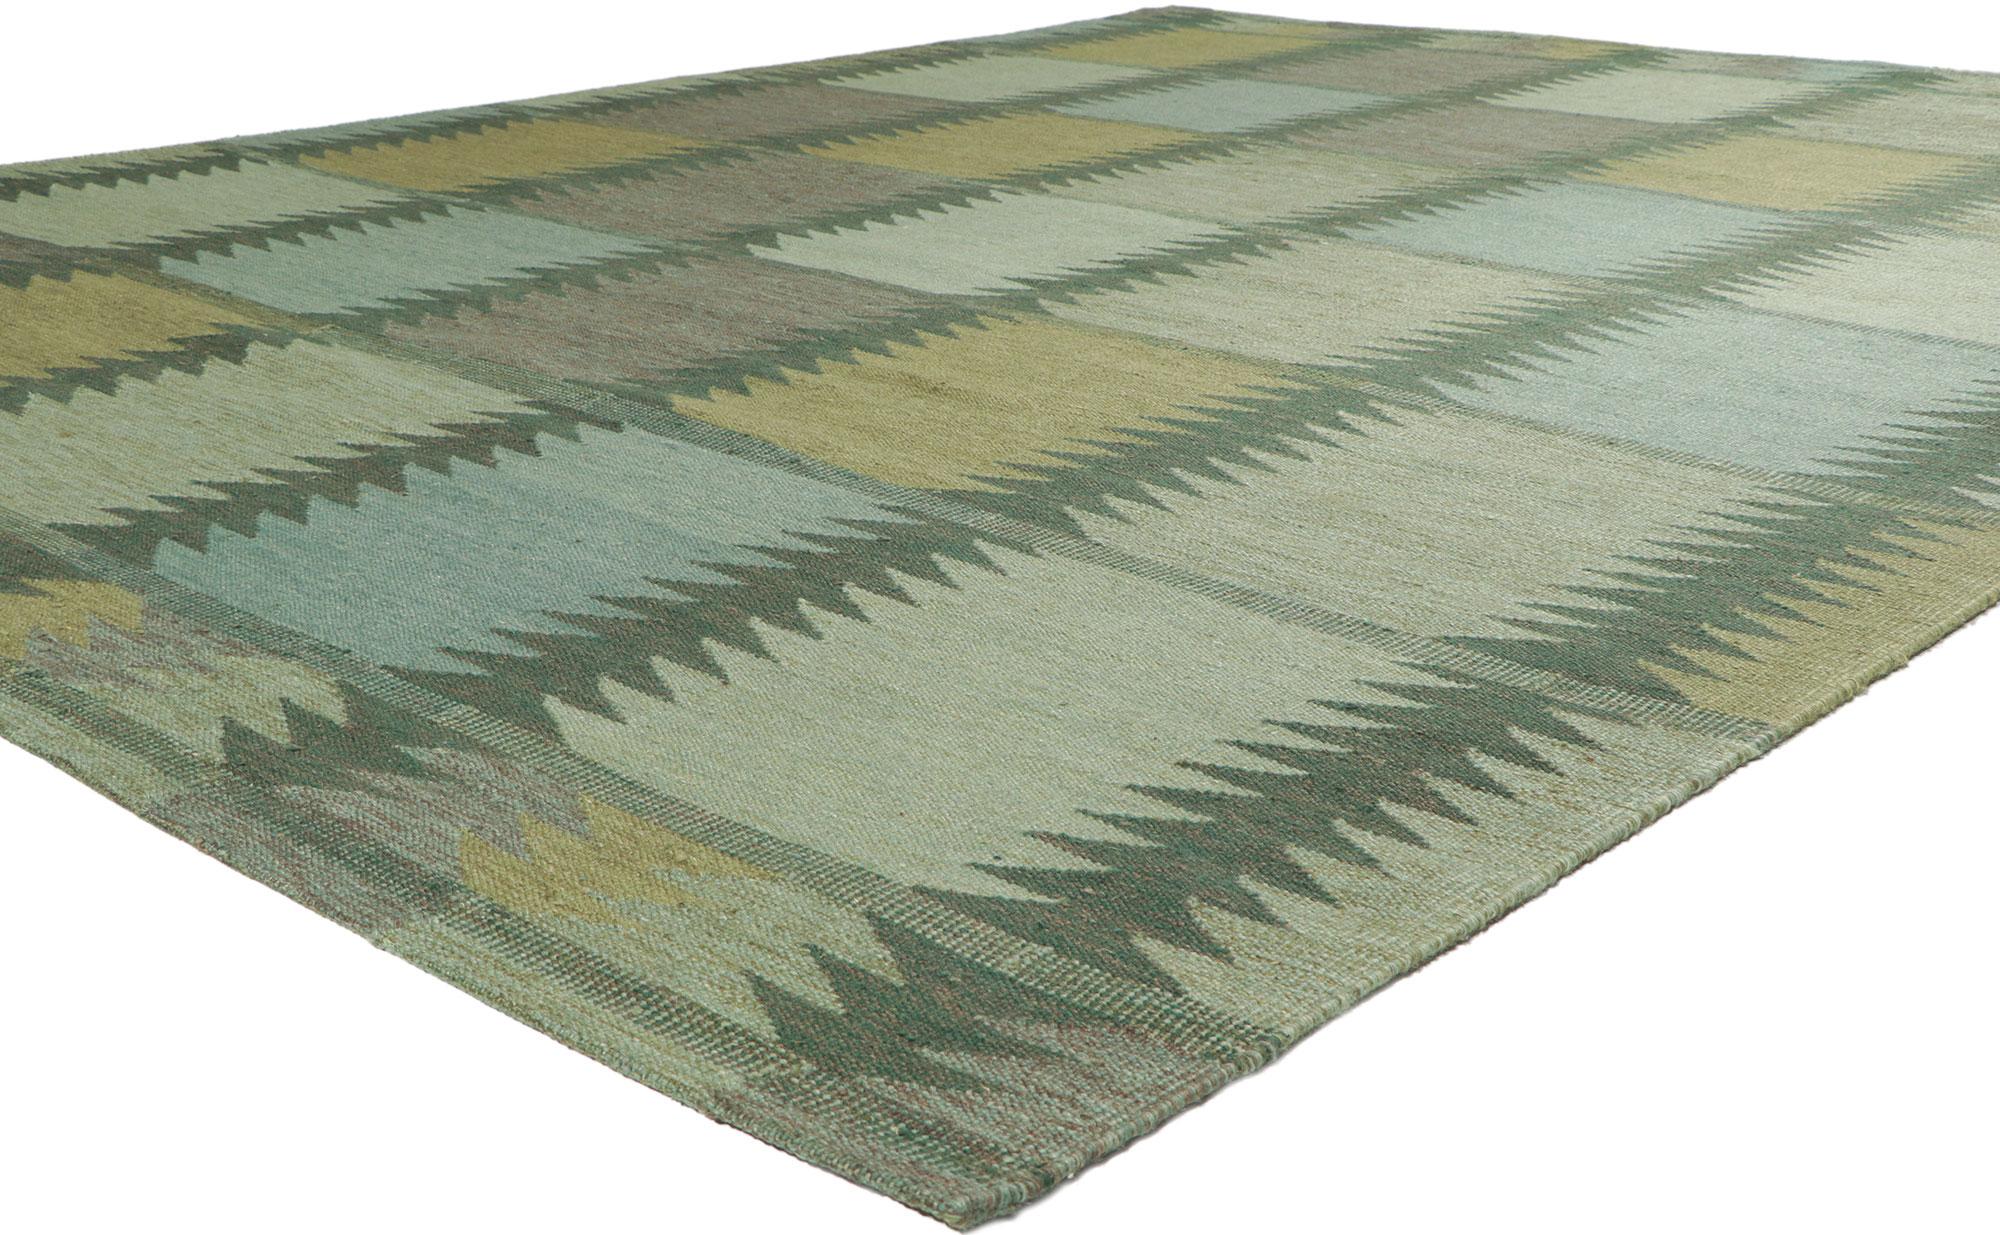 30842 New Swedish Marianne Richter Inspired Kilim Rug 09'01 x 11'09. With its simplicity and geometric design, this hand-woven wool Swedish inspired Kilim rug provides a feeling of cozy contentment without the clutter. The abrashed field features an